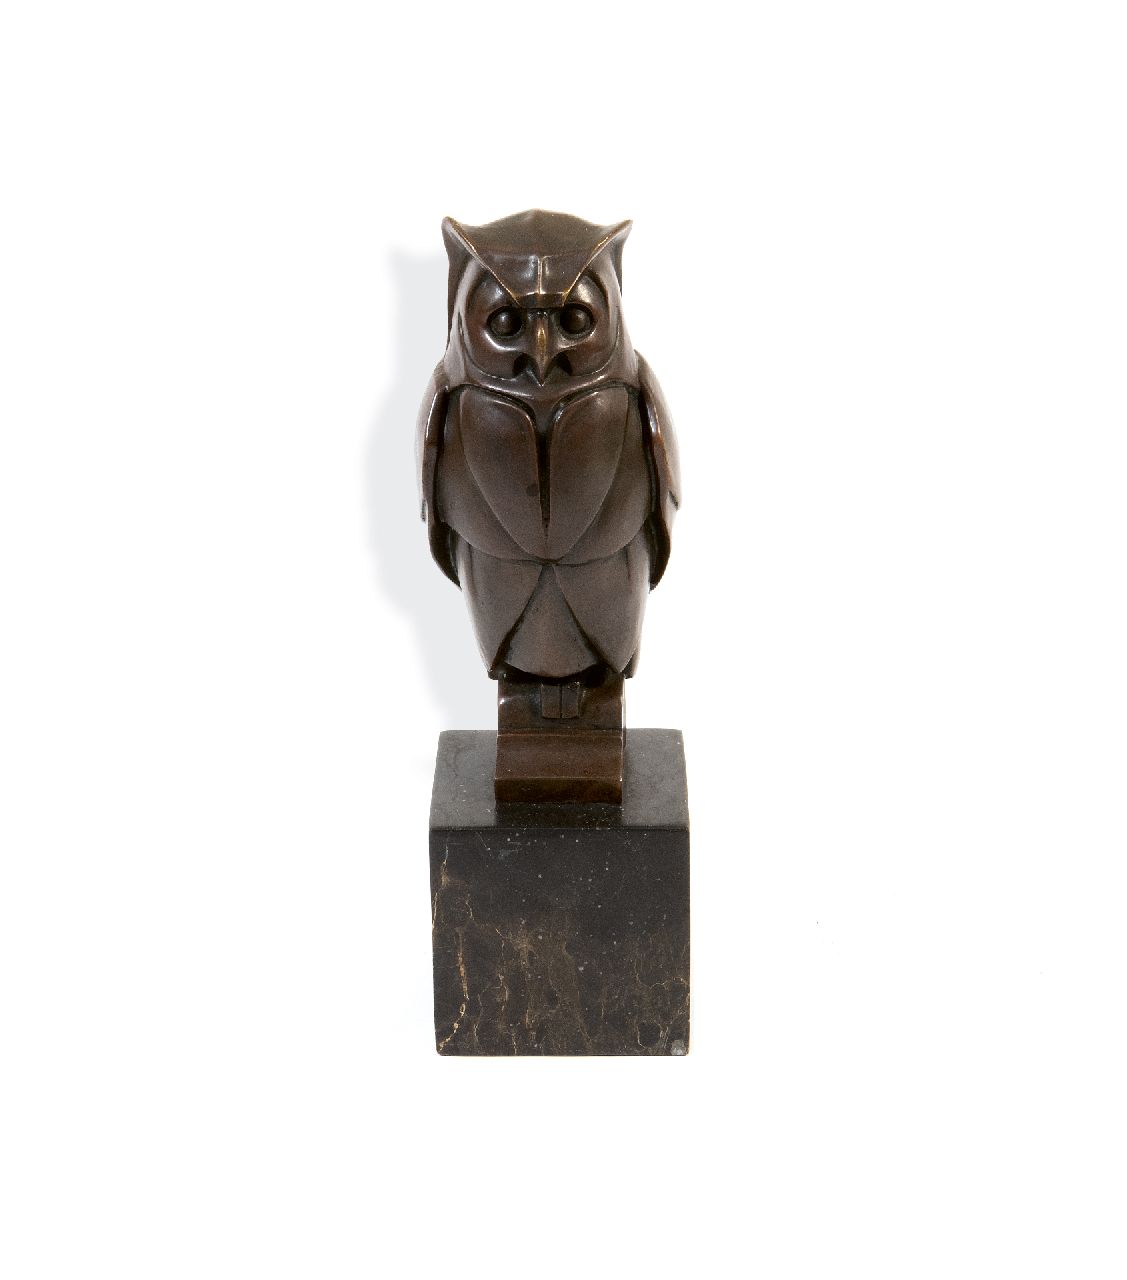 Onbekend   | Onbekend | Sculptures and objects offered for sale | Owl, bronze 33.0 cm